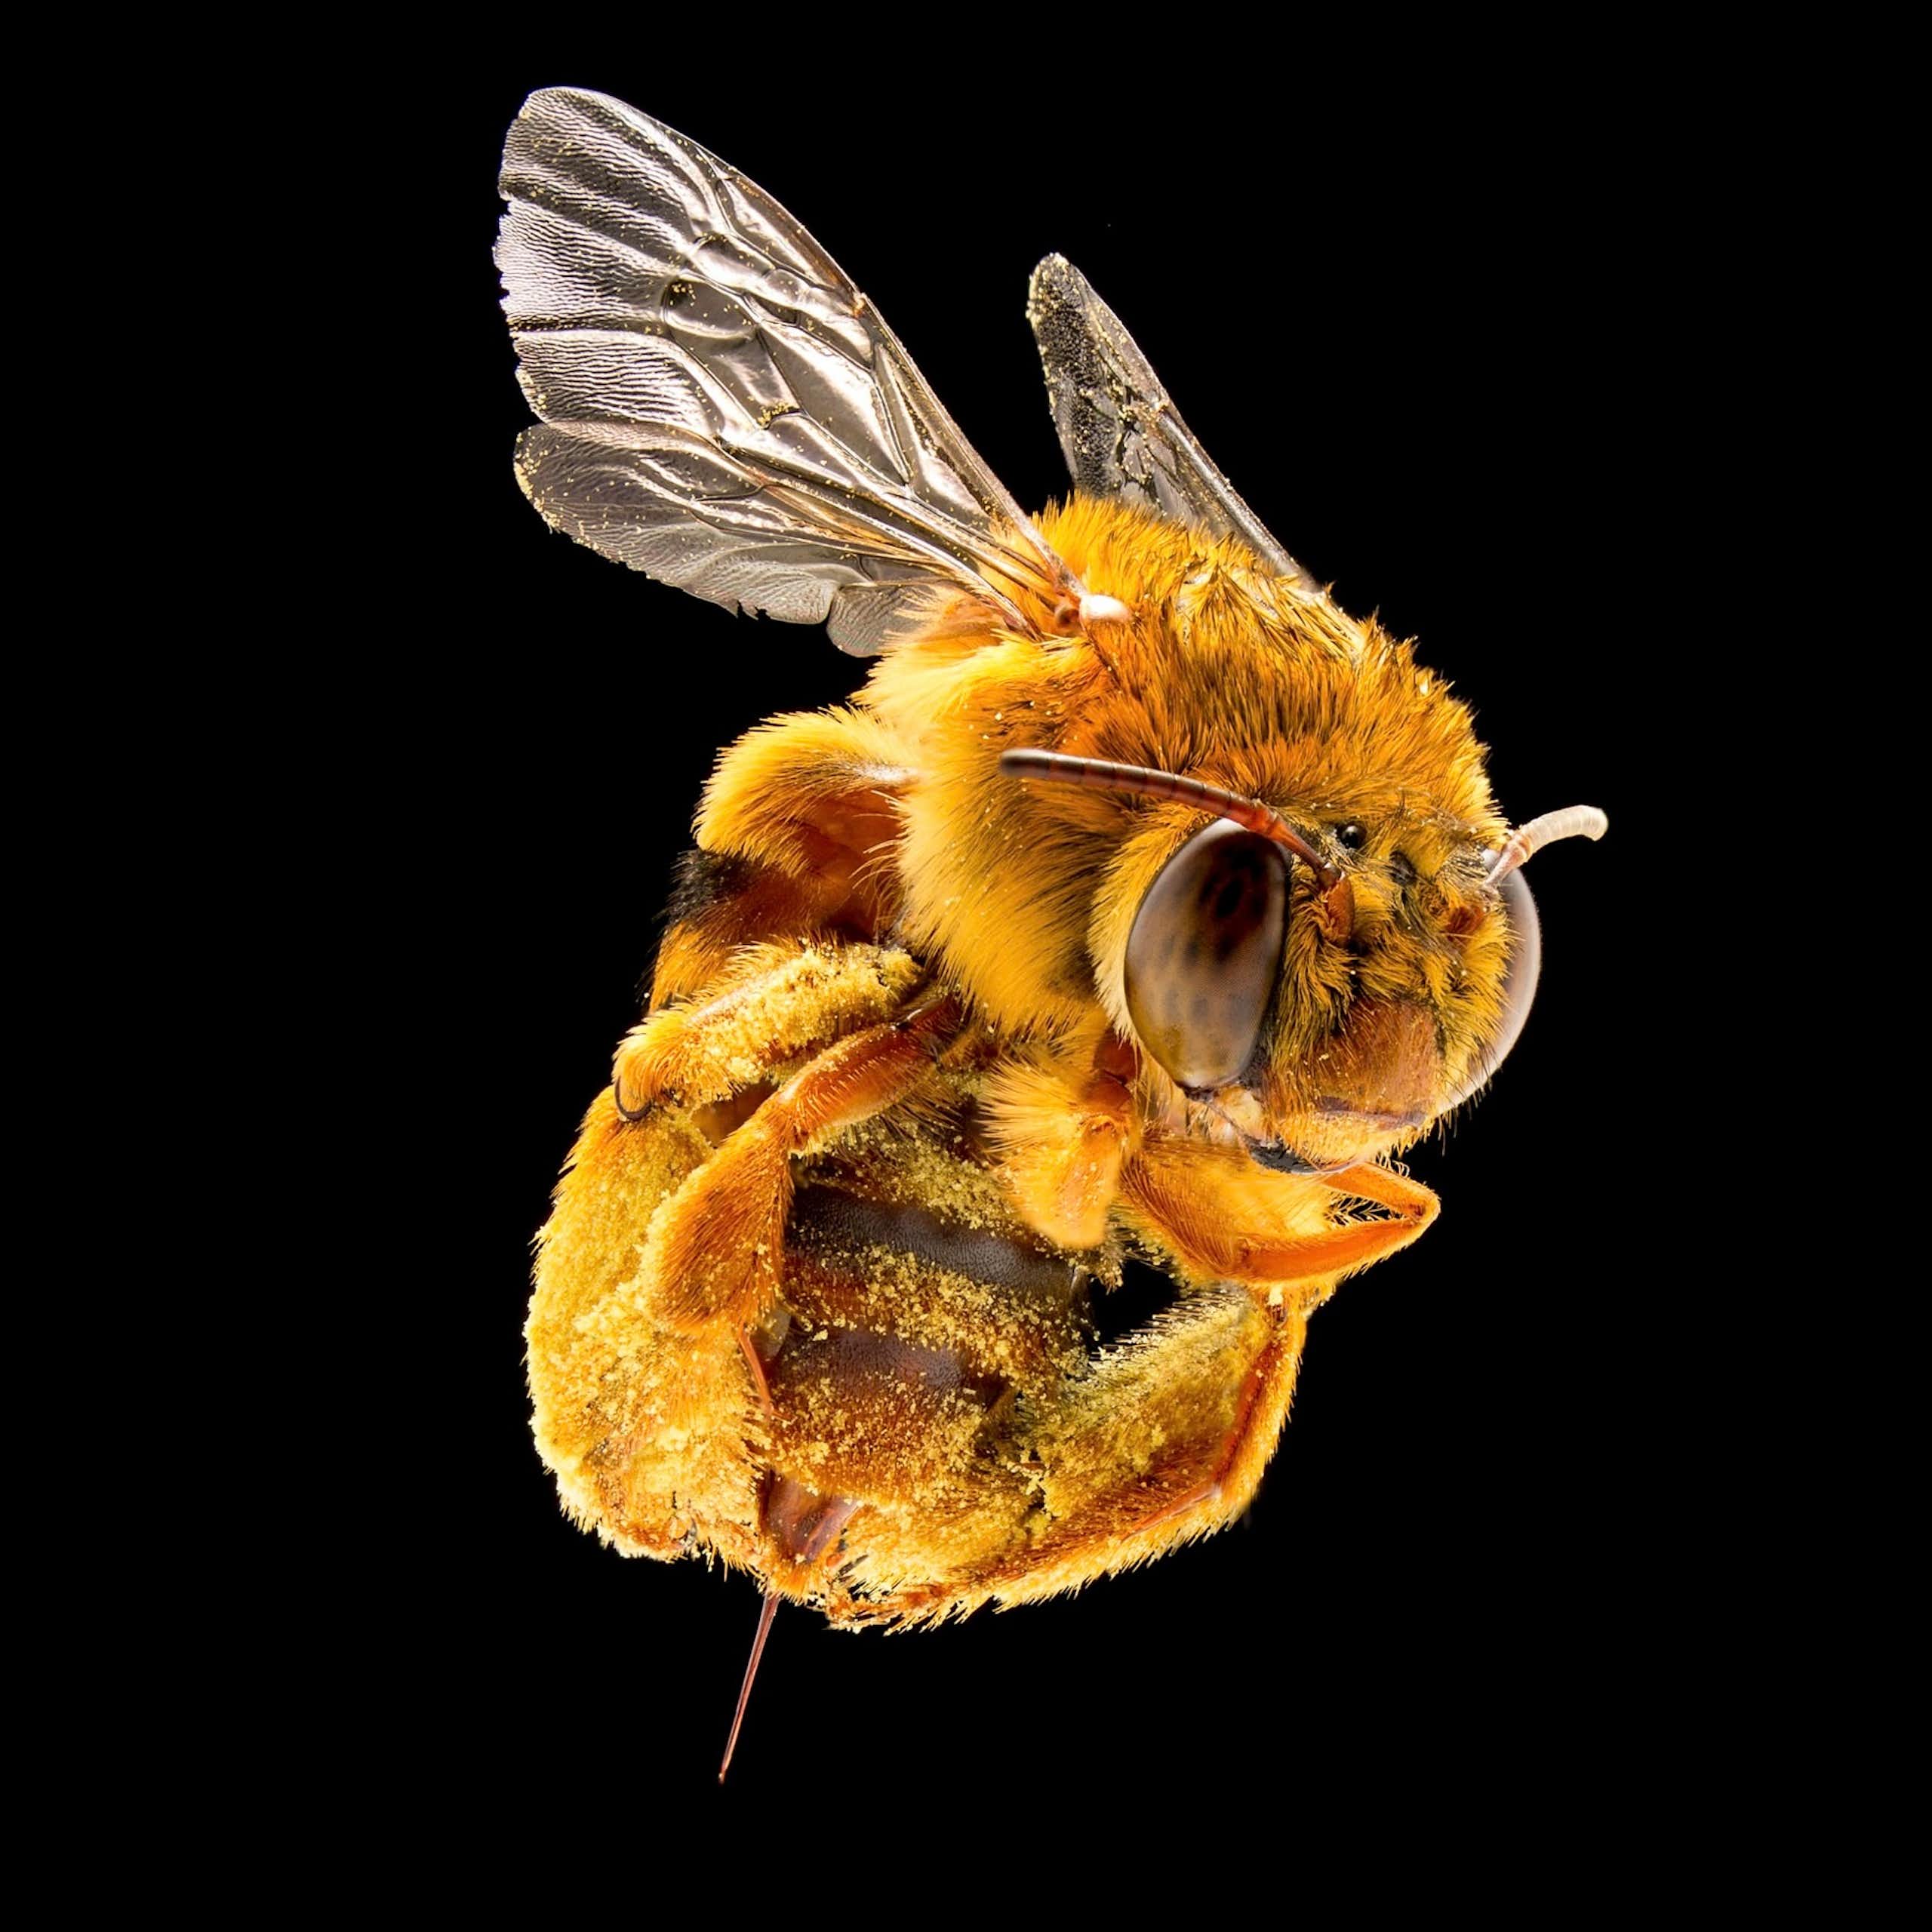 A photo of a furry-looking bee with a large stinger.